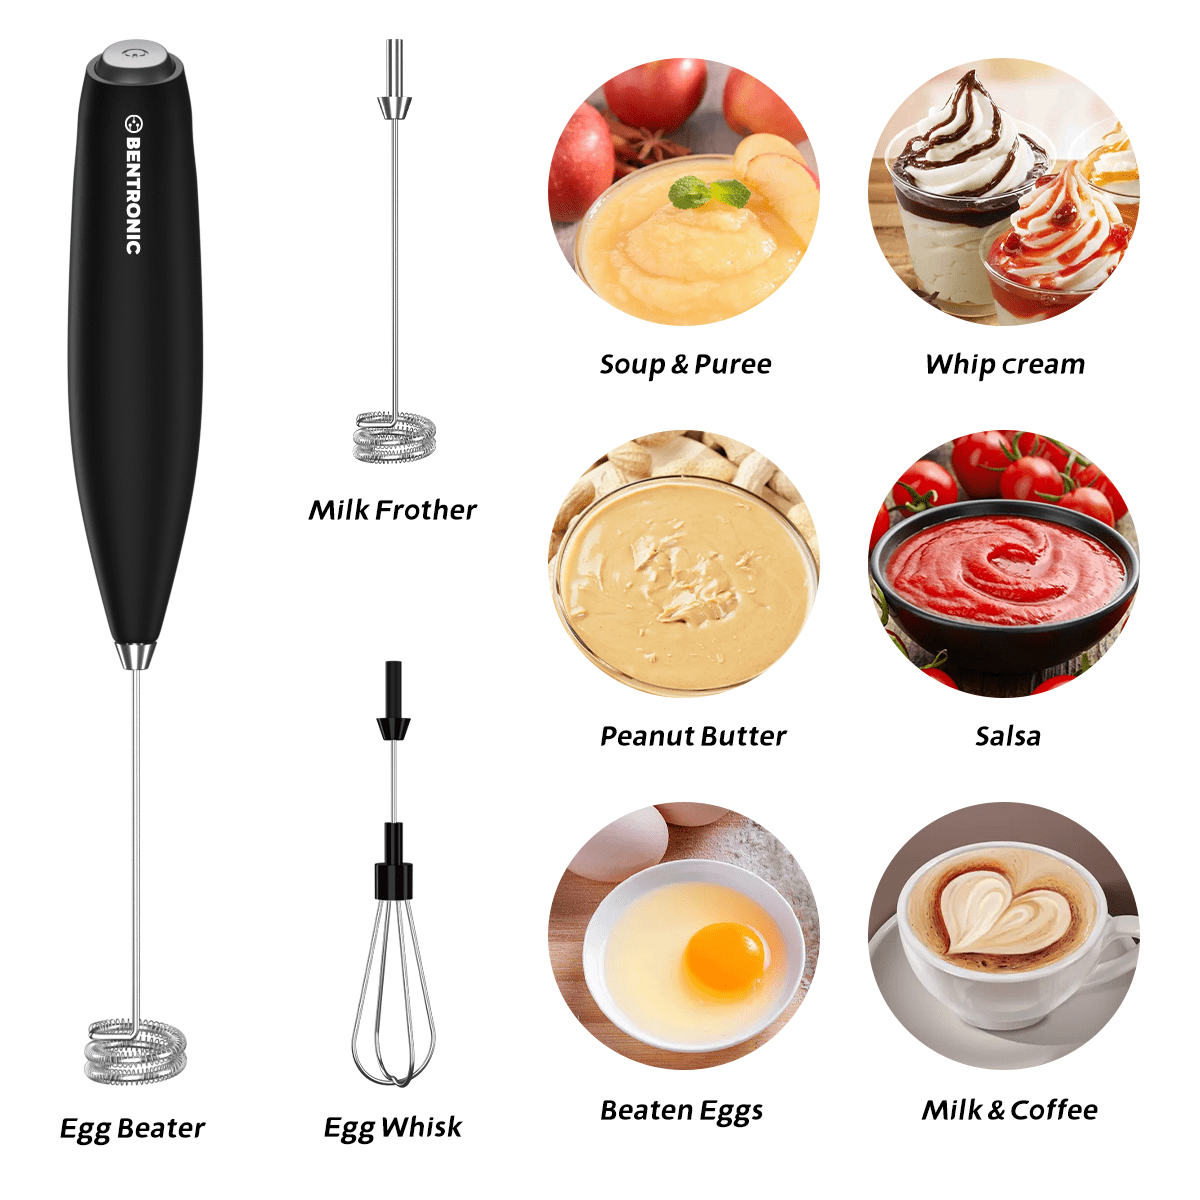 Jjyy 1pc/2pcs Frother Electric Milk Mixer Drink Foamer Coffee Egg